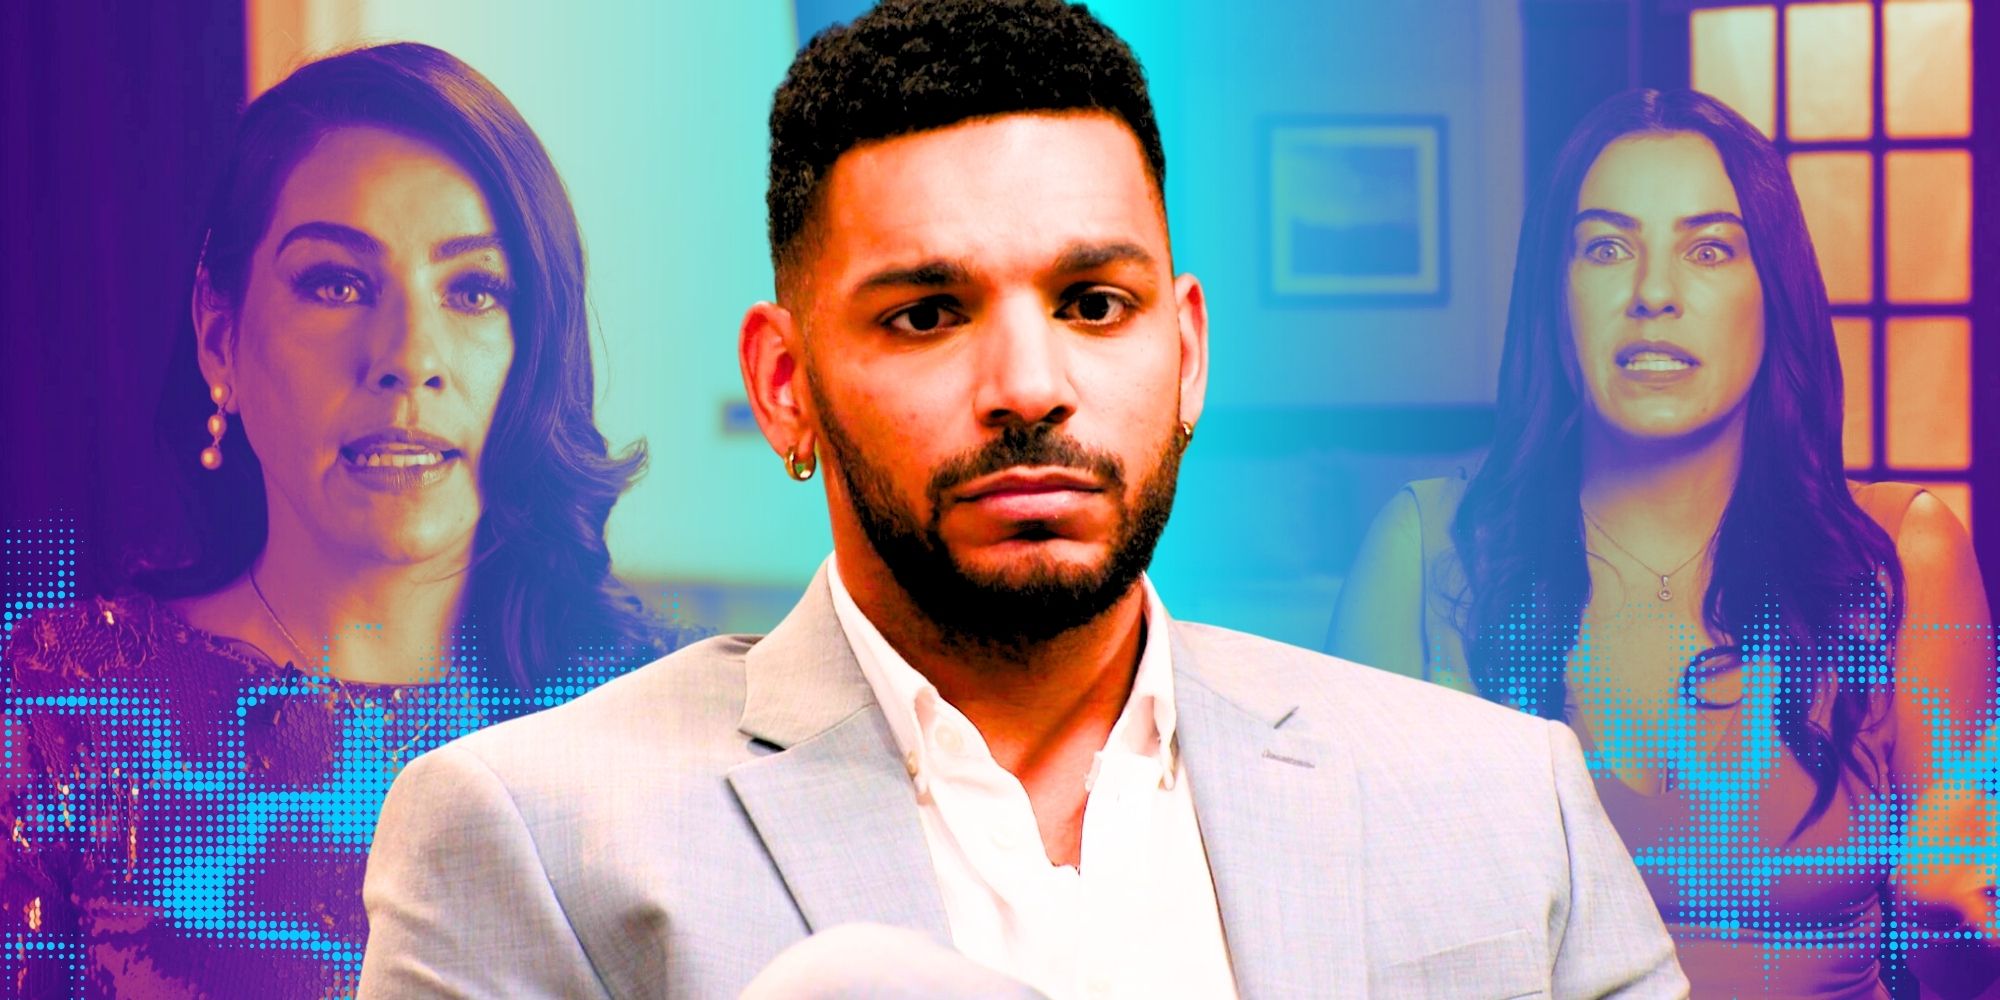 90 Day Fiance's Jamal Menzies and montage of Veronica Rodriguez, both with serious expressions